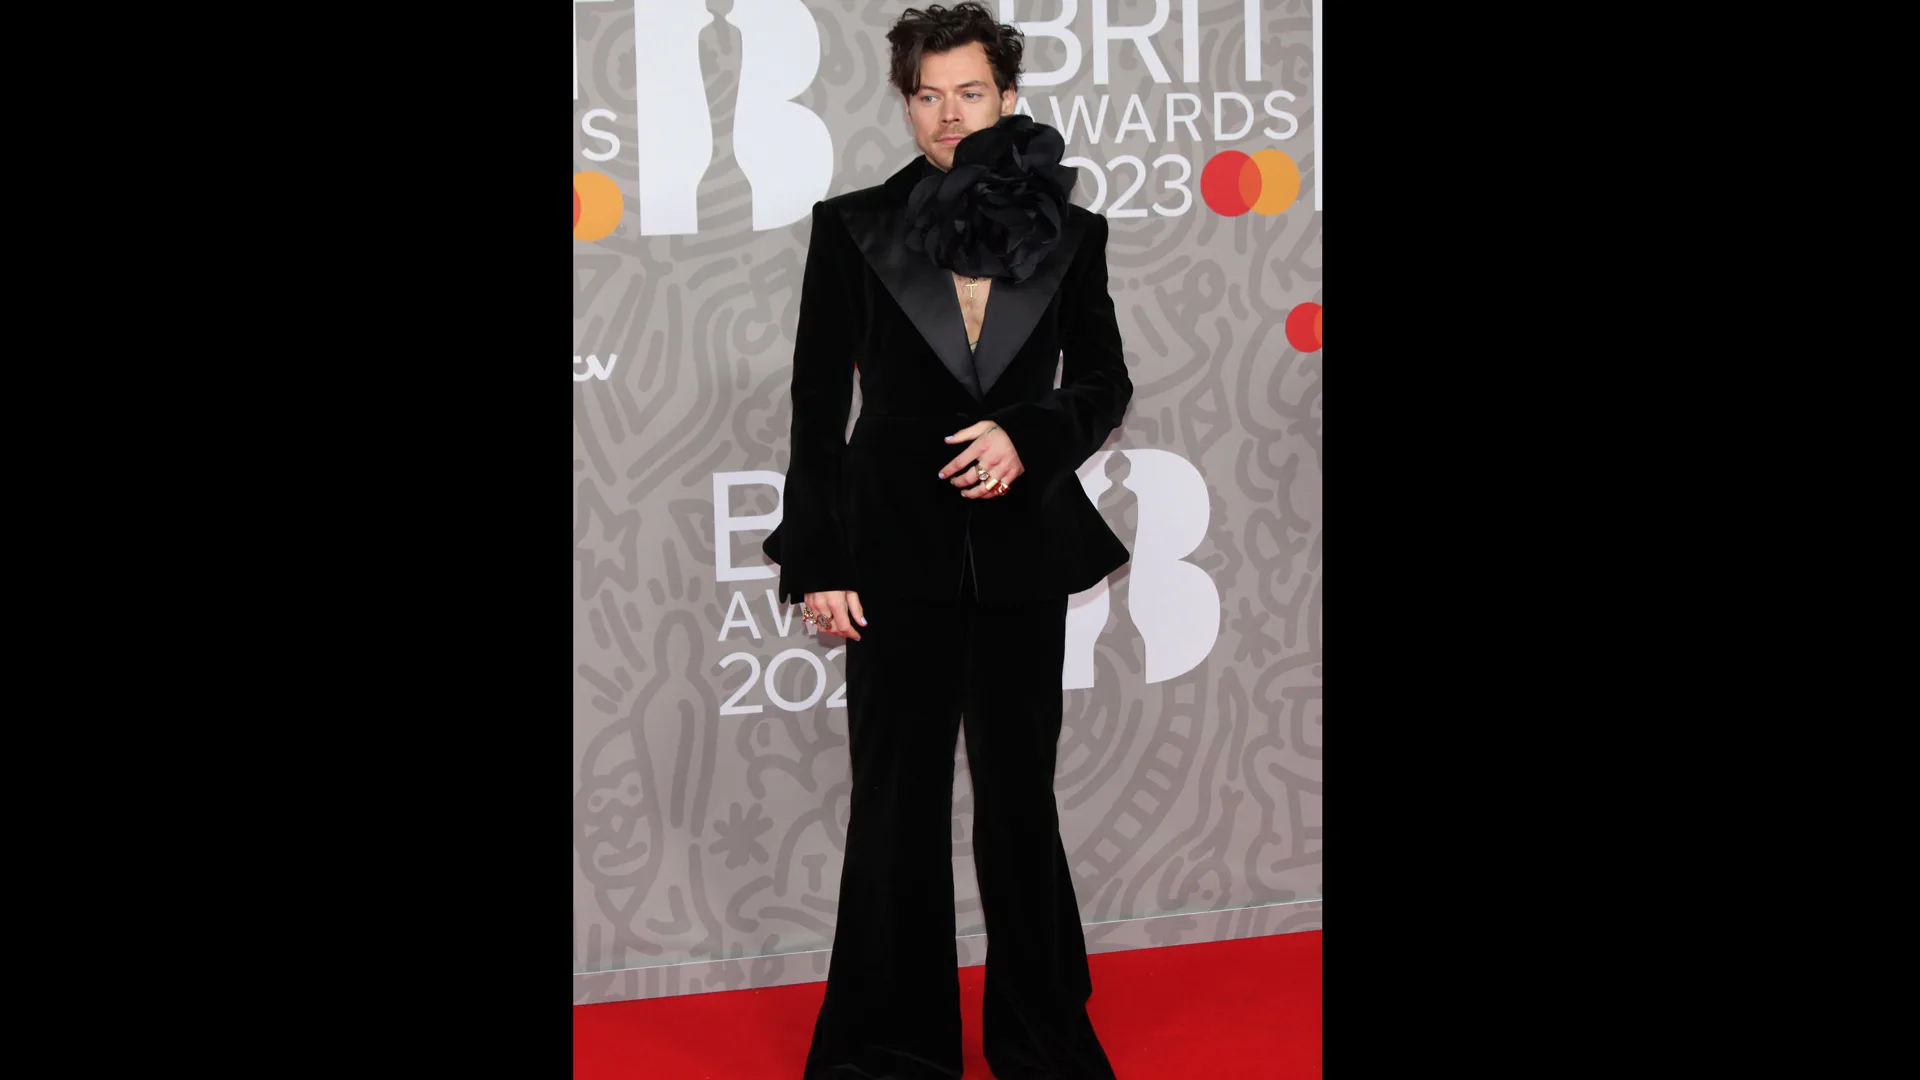 Photograph of Harry Styles wearing a black suit with an oversized flower choker on the red carpet at the BRIT awards